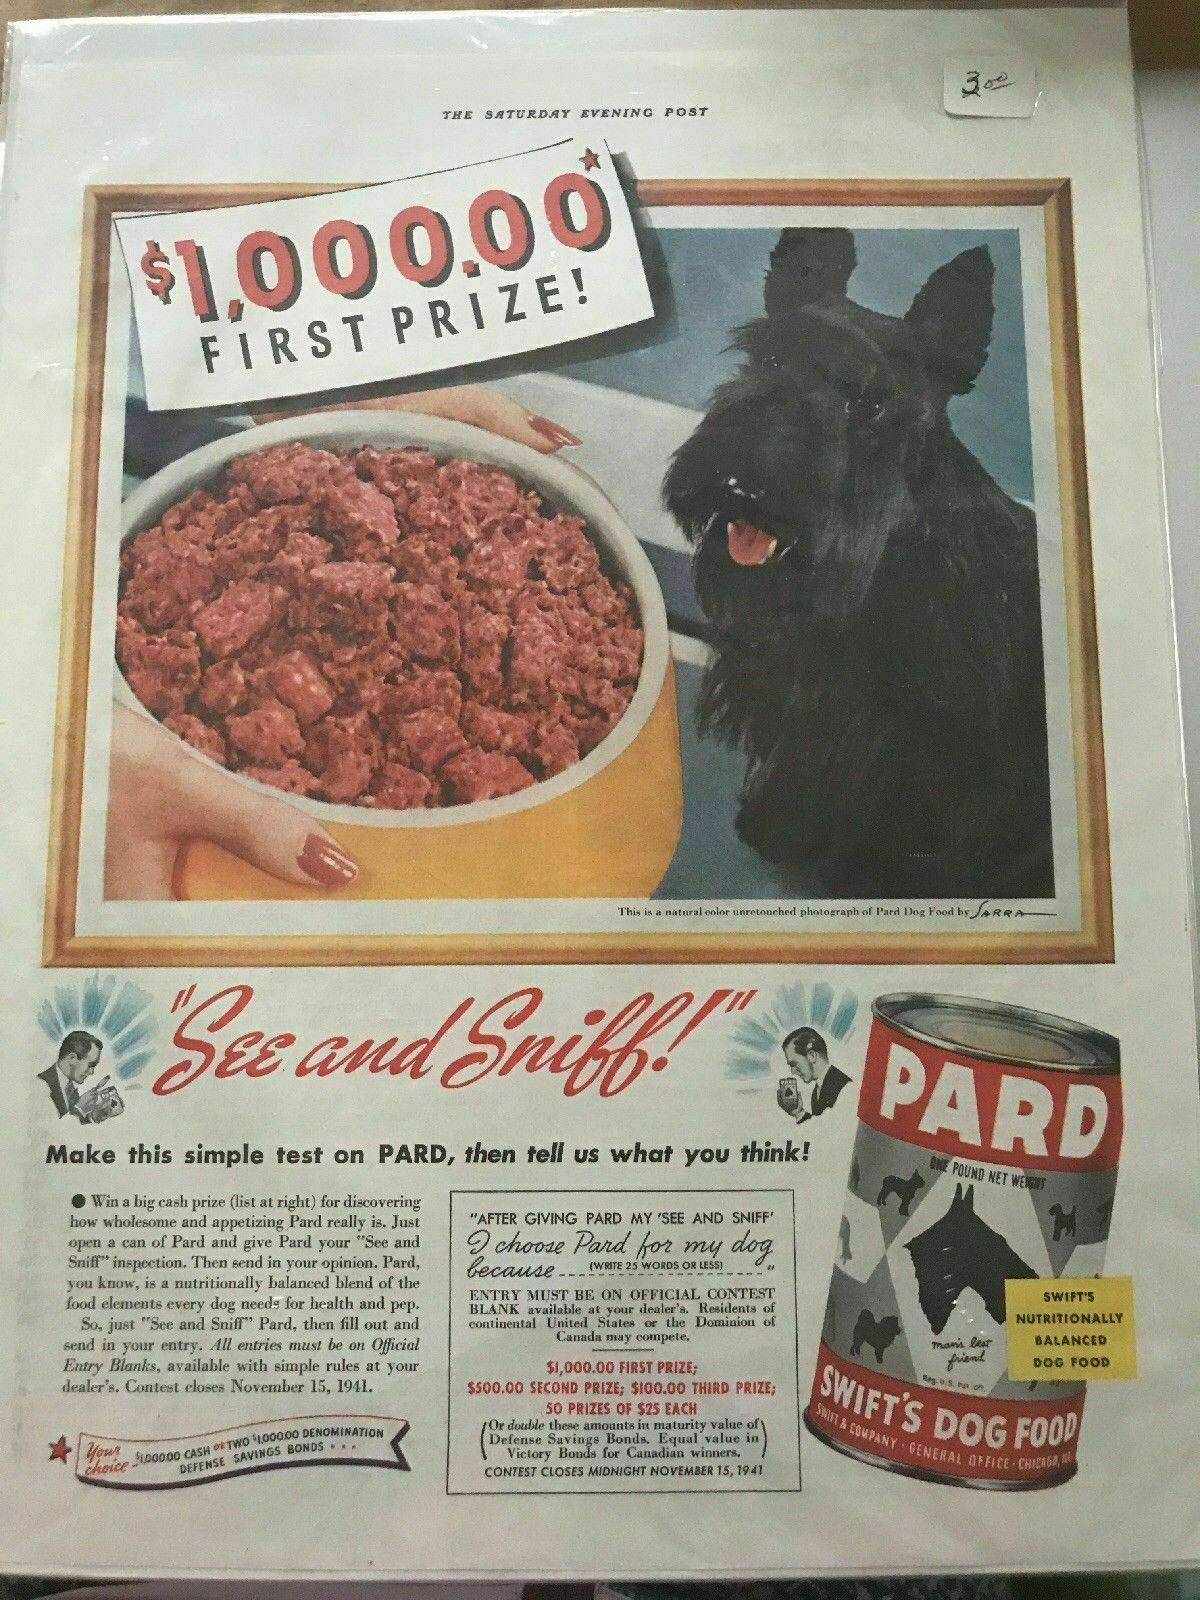 Vintage Print Advertising: Scottie/westie "see And Sniff" Saturday Evening Post